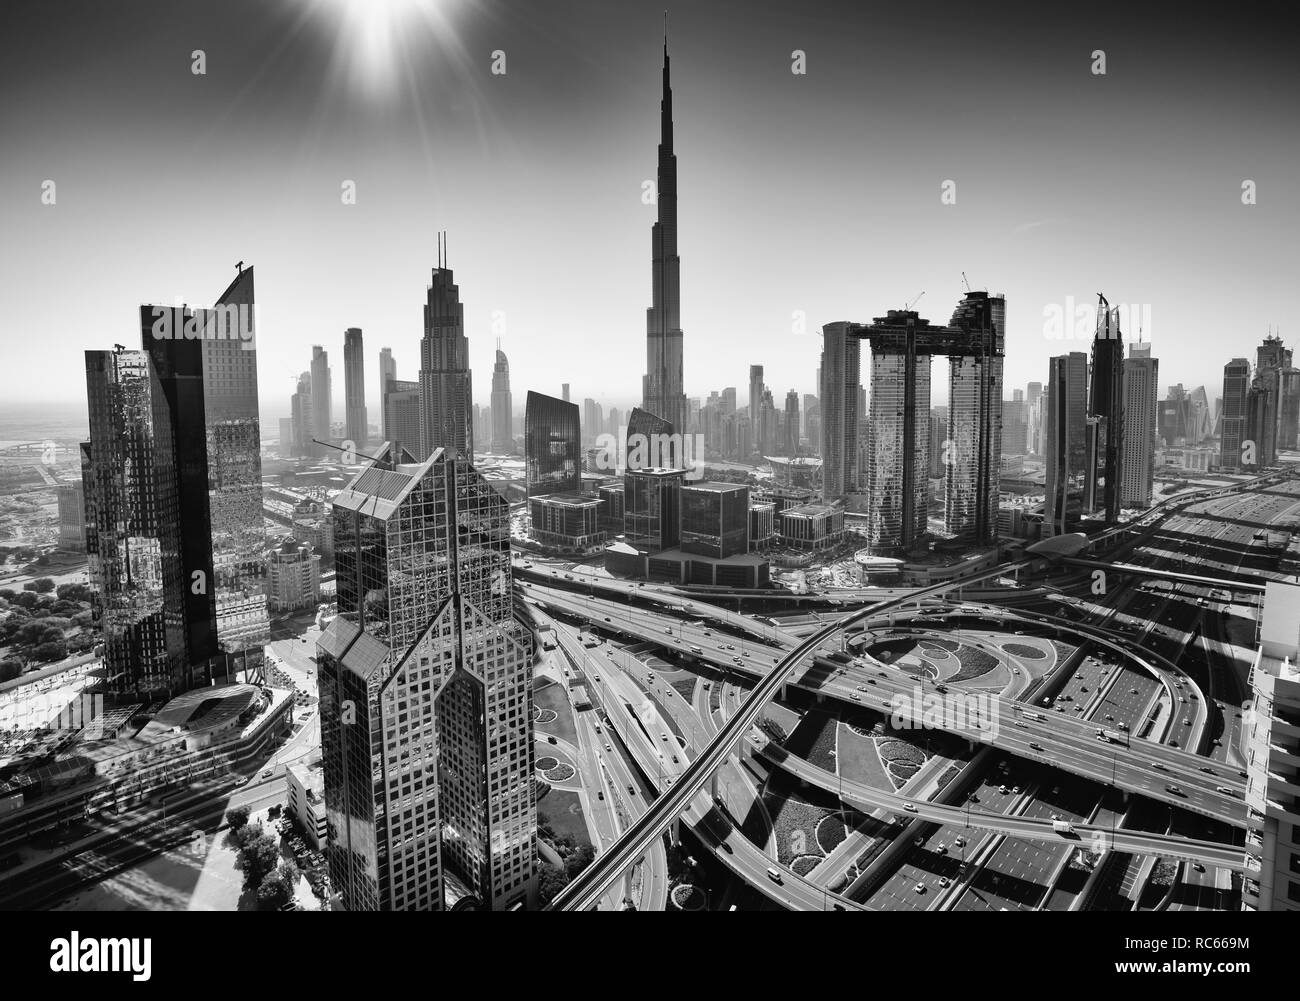 Skyline view of downtown district in Dubai with Burj Khalifa tower prominent, United Arab Emirates Stock Photo